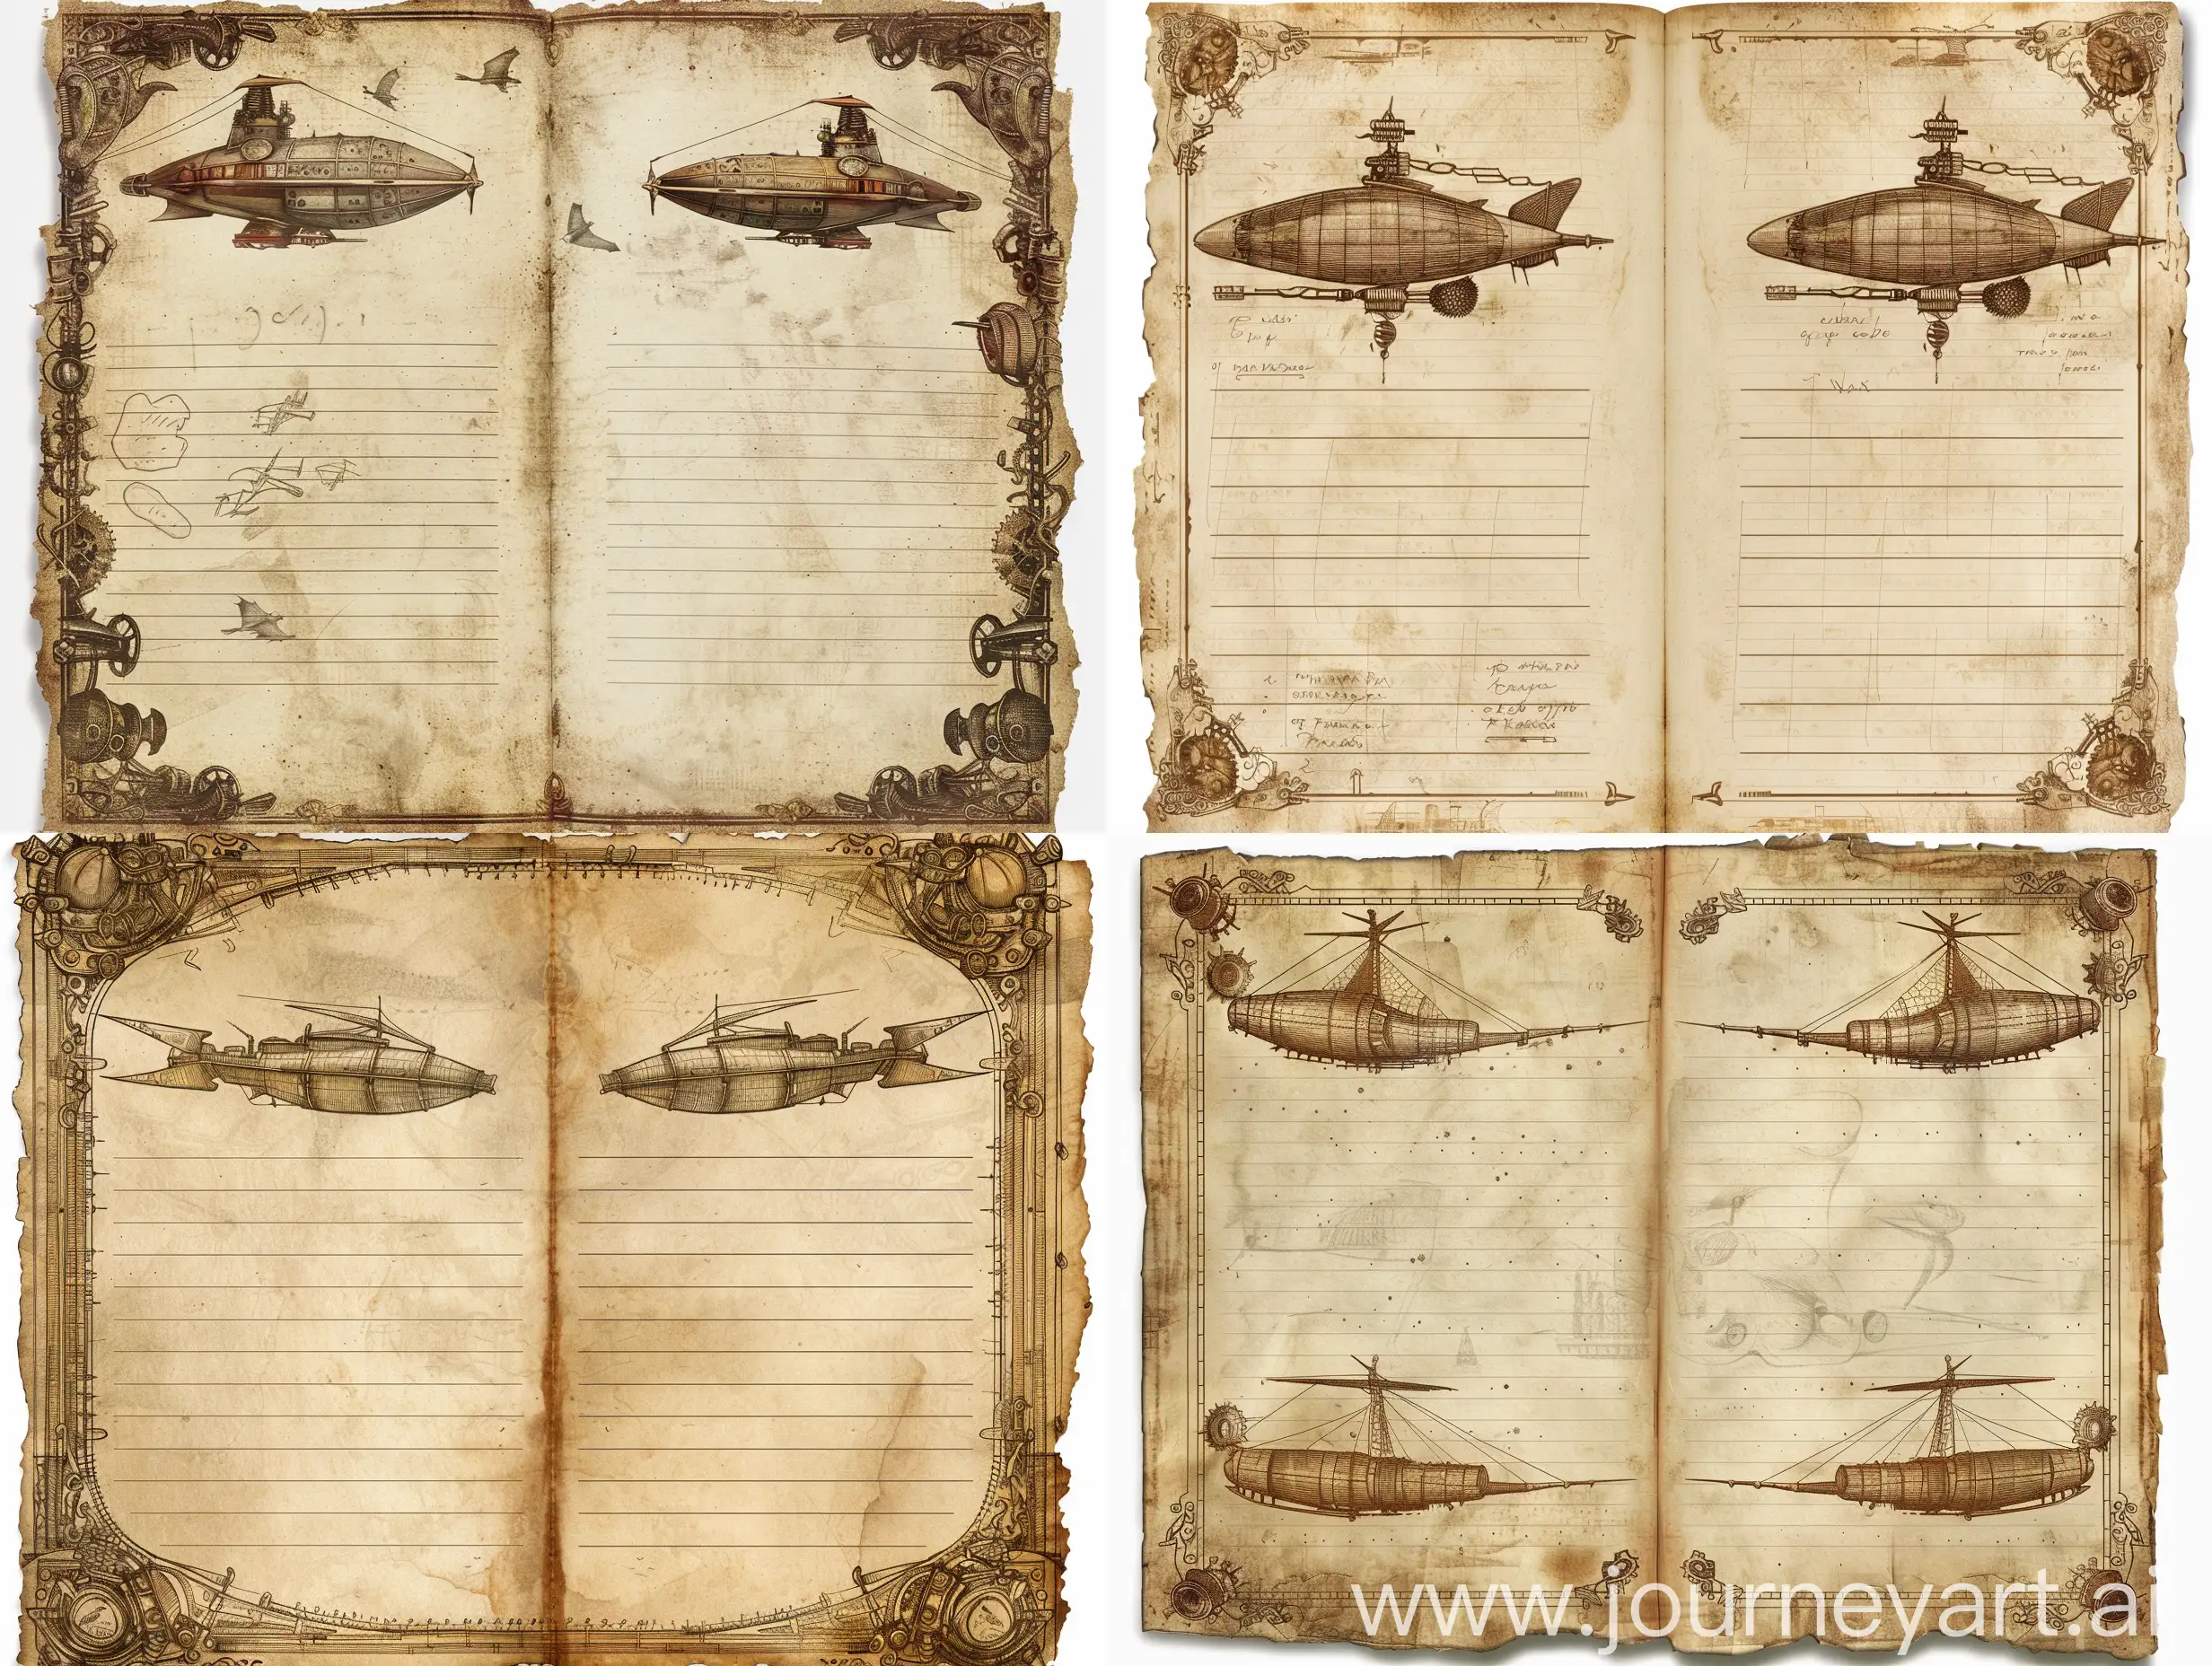 open notebook page-spread, note paper style, background, bordered, steampunk airships one on each side, sketchbook style, old and weathered